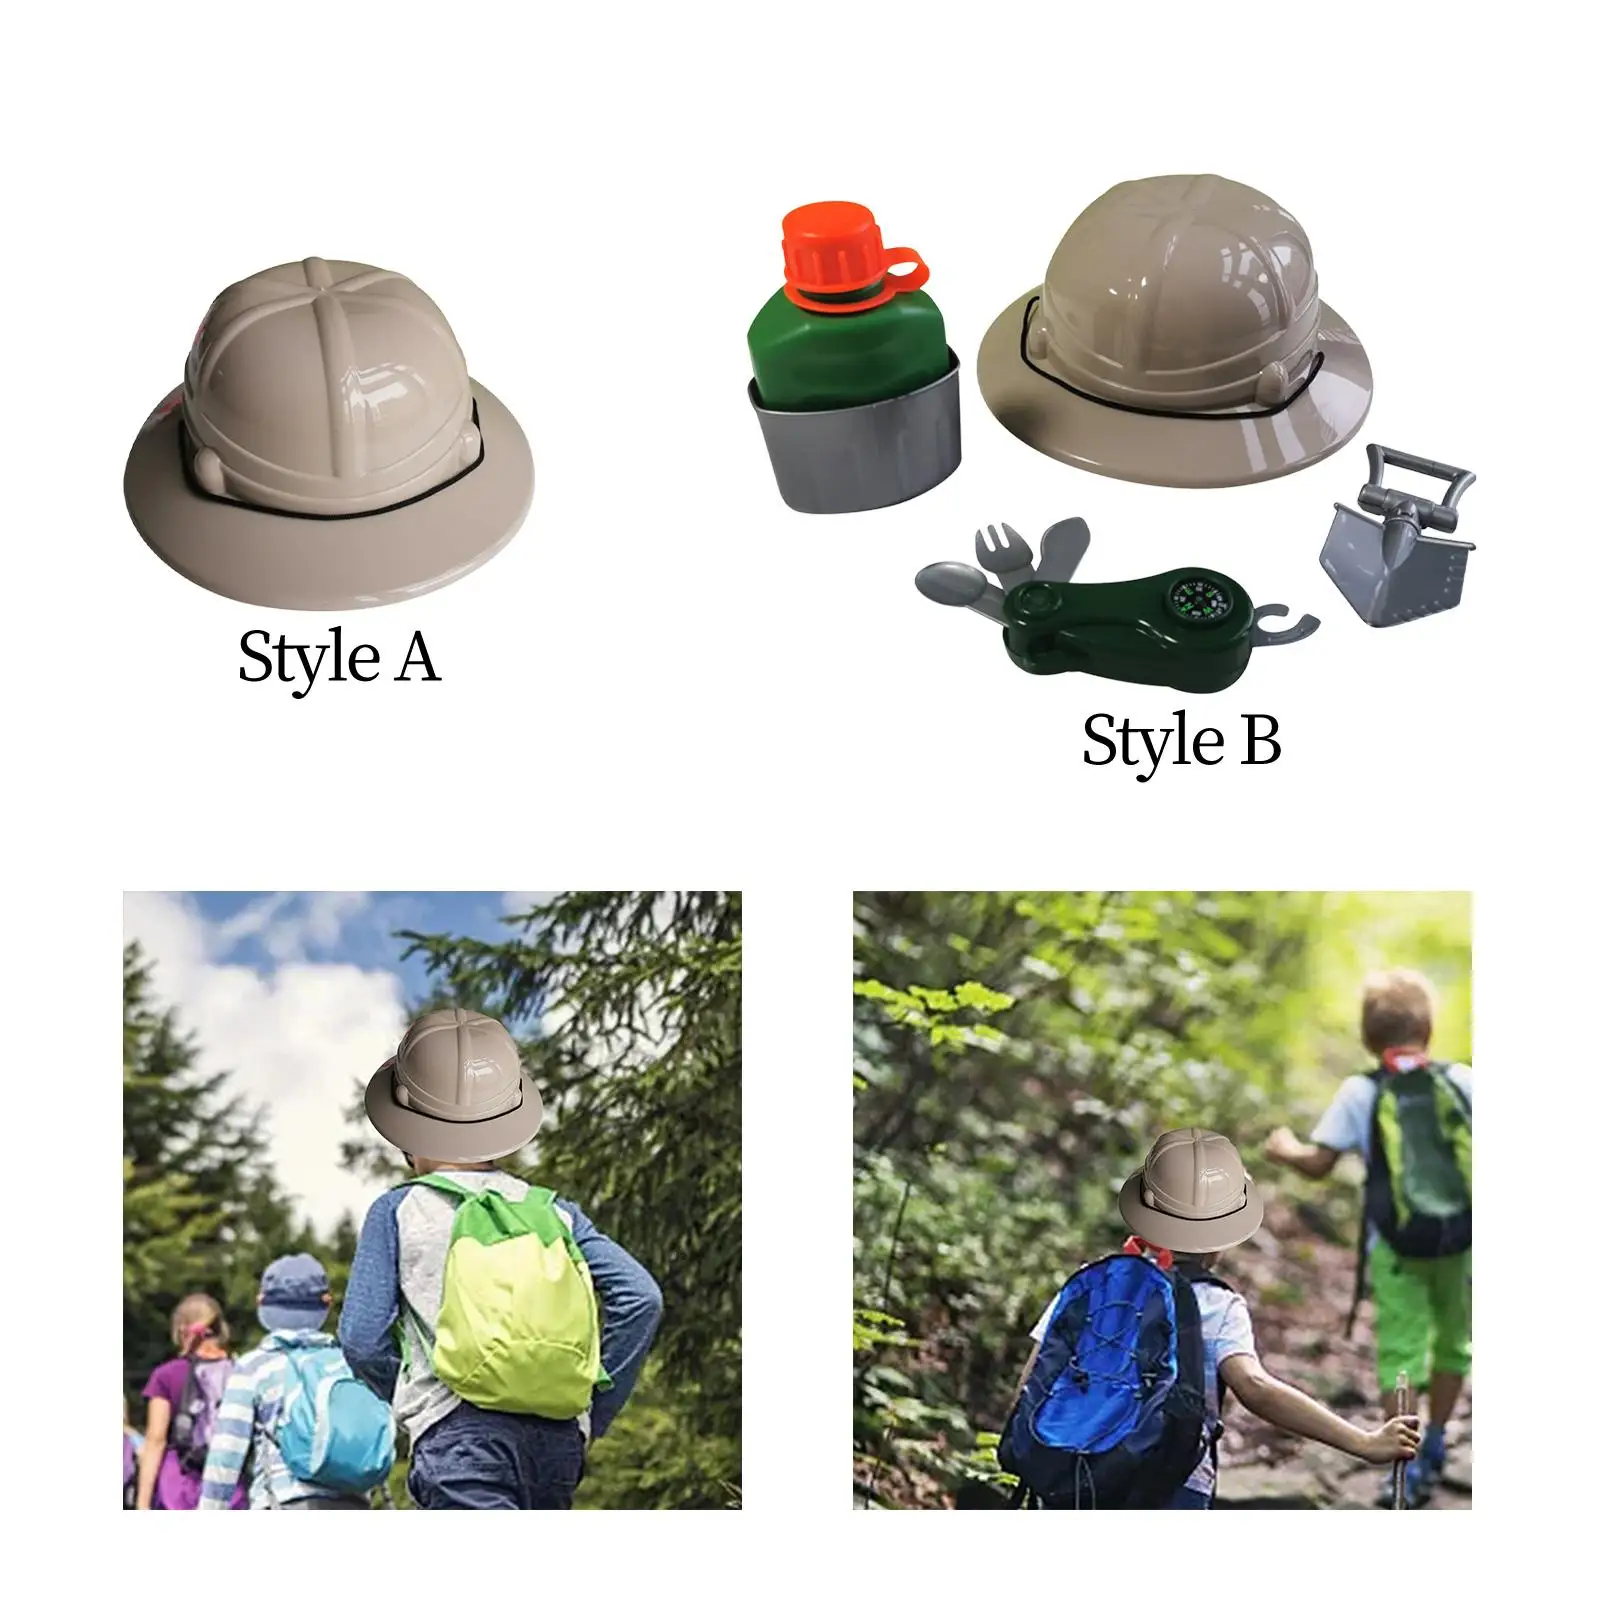 Children Toys Explorer Kits Accessories Camping and Backyard Kits Outdoor Adventure Kits for Toddler Boys Girls Children Kids